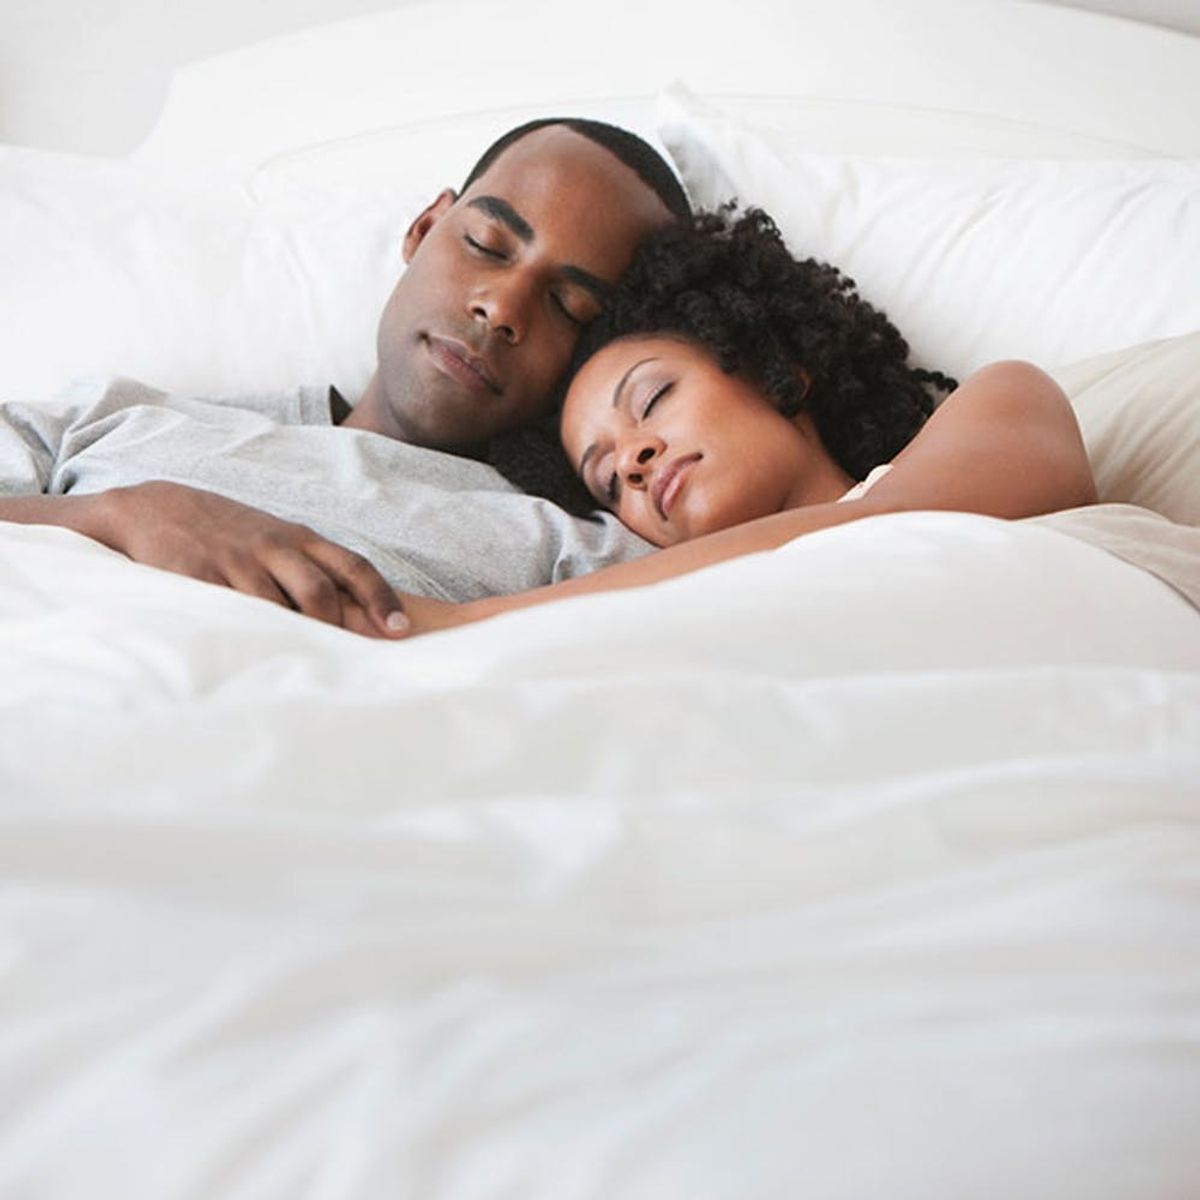 Your Sleep Habits Could Be Affecting the Happiness of Your Relationship